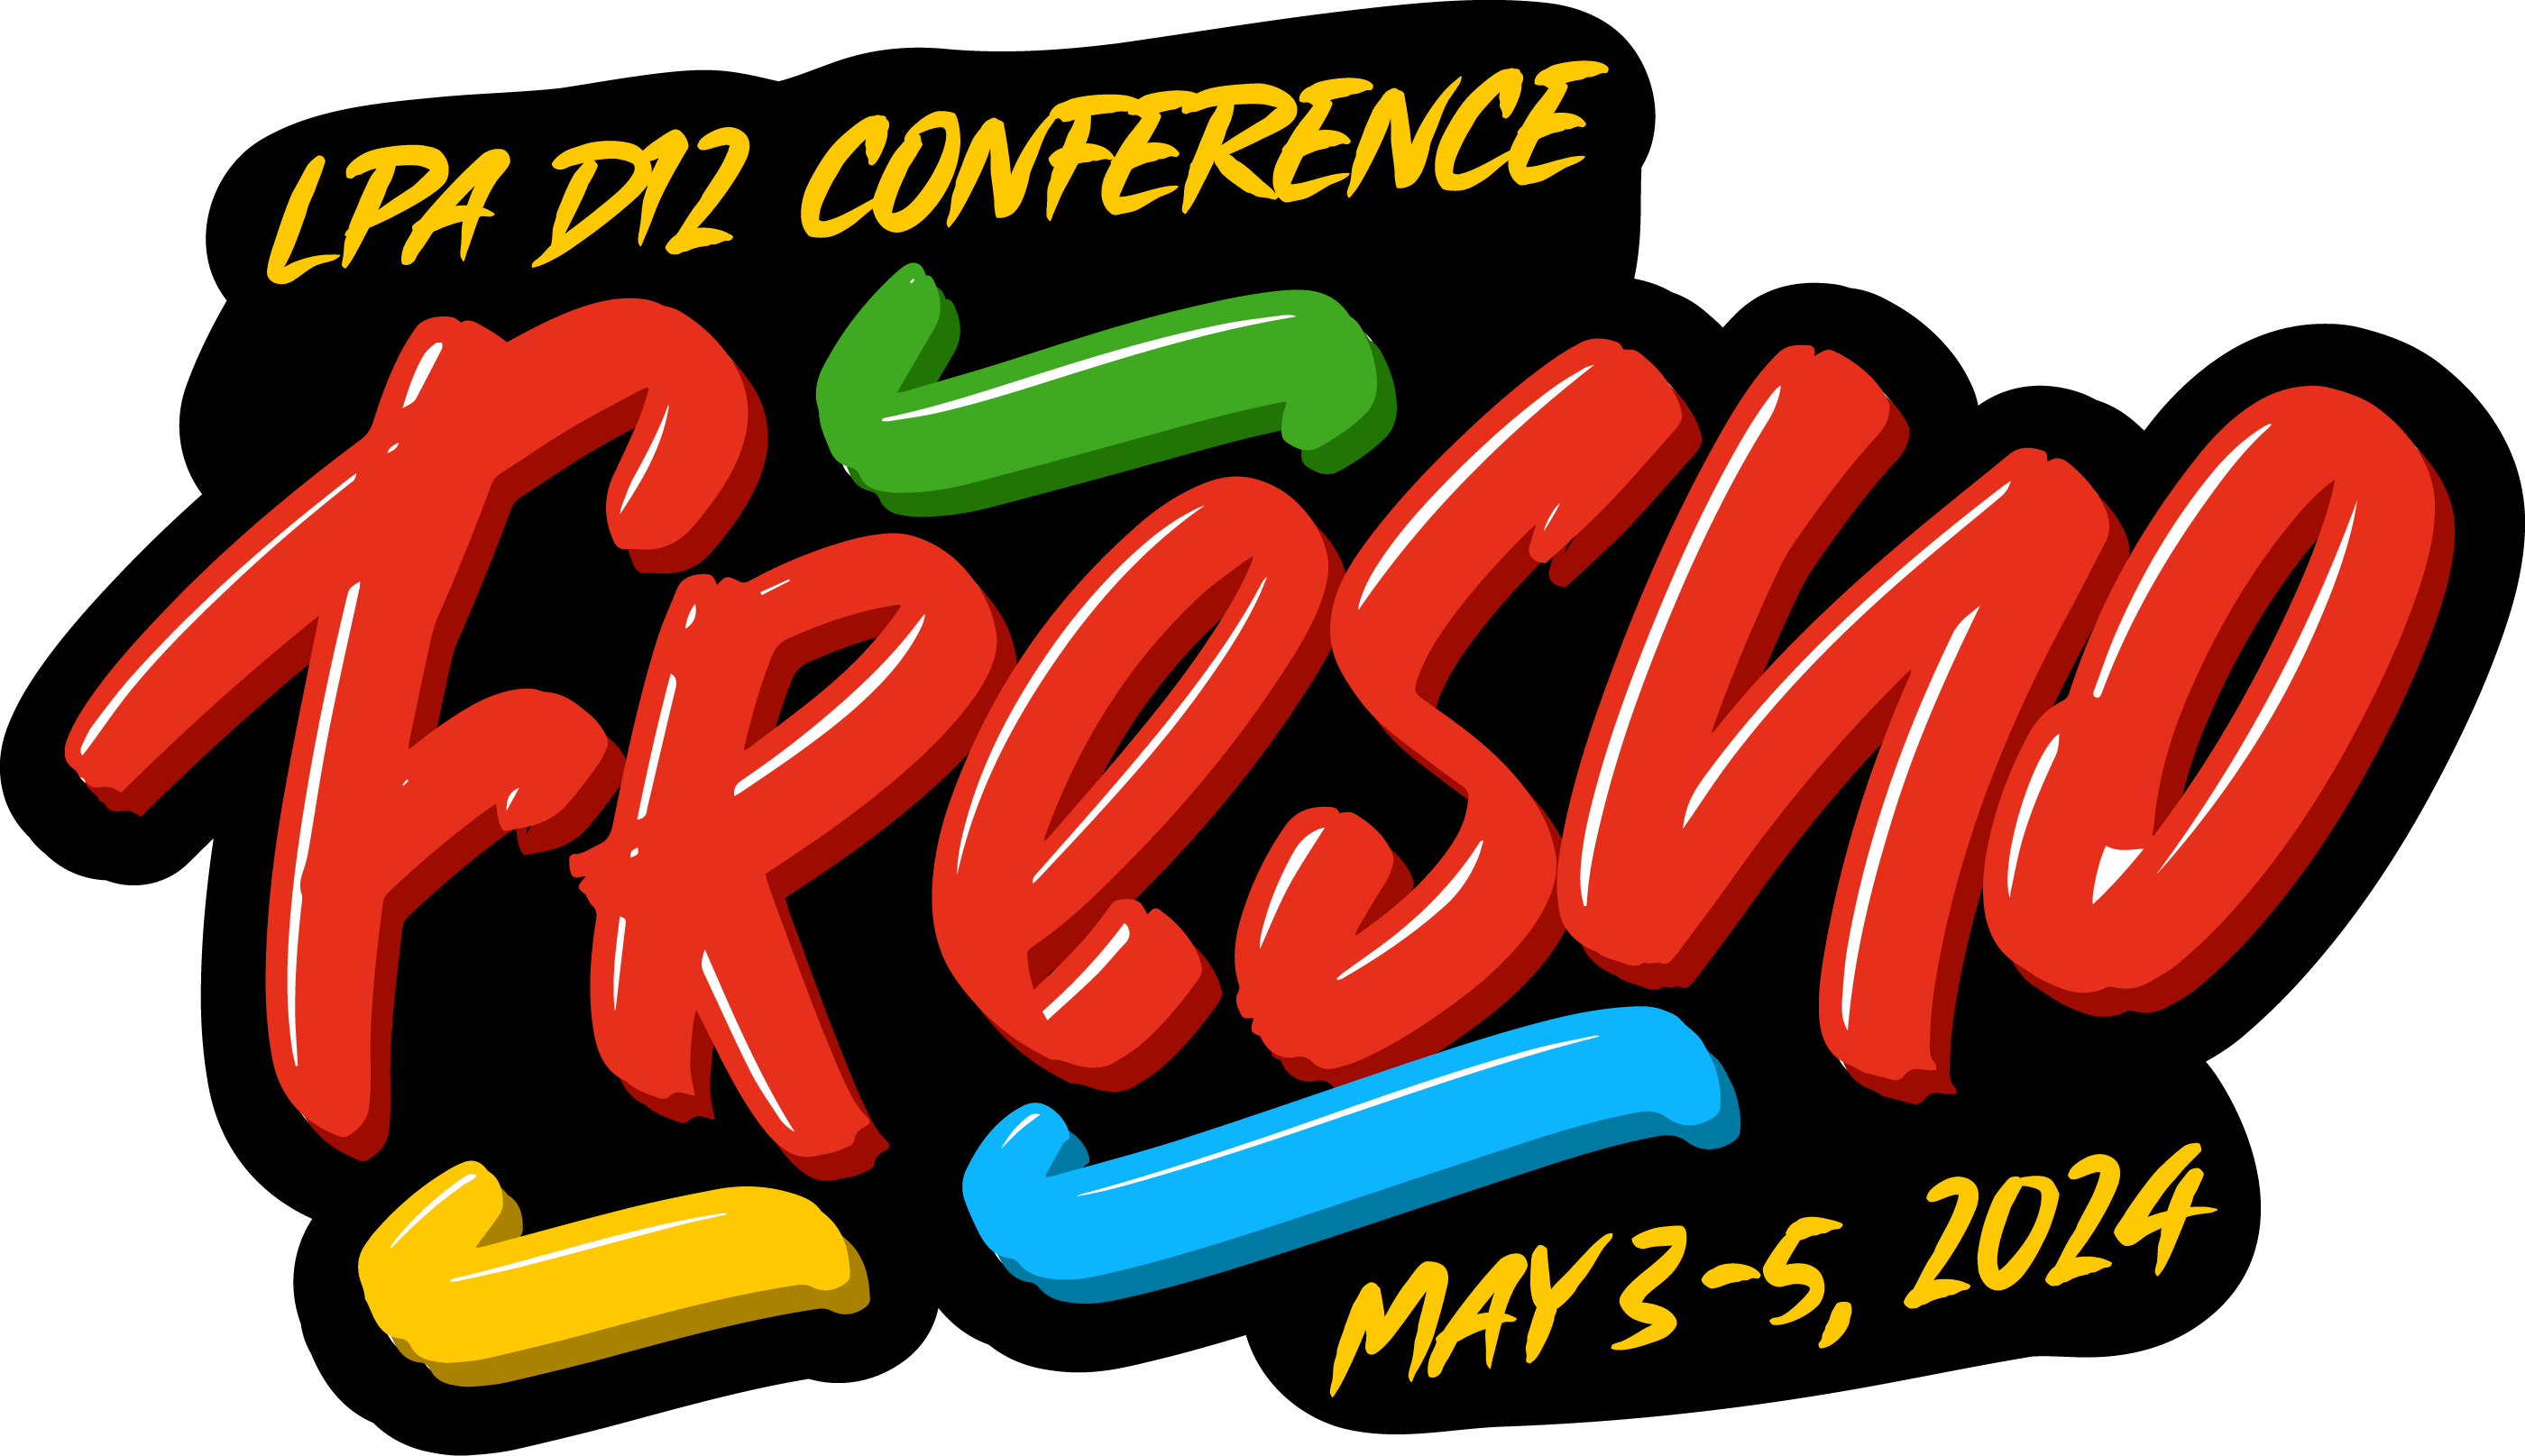 Logo of the LPA District 12 Conference (May 3-5, 2024)  Fresno, CA.